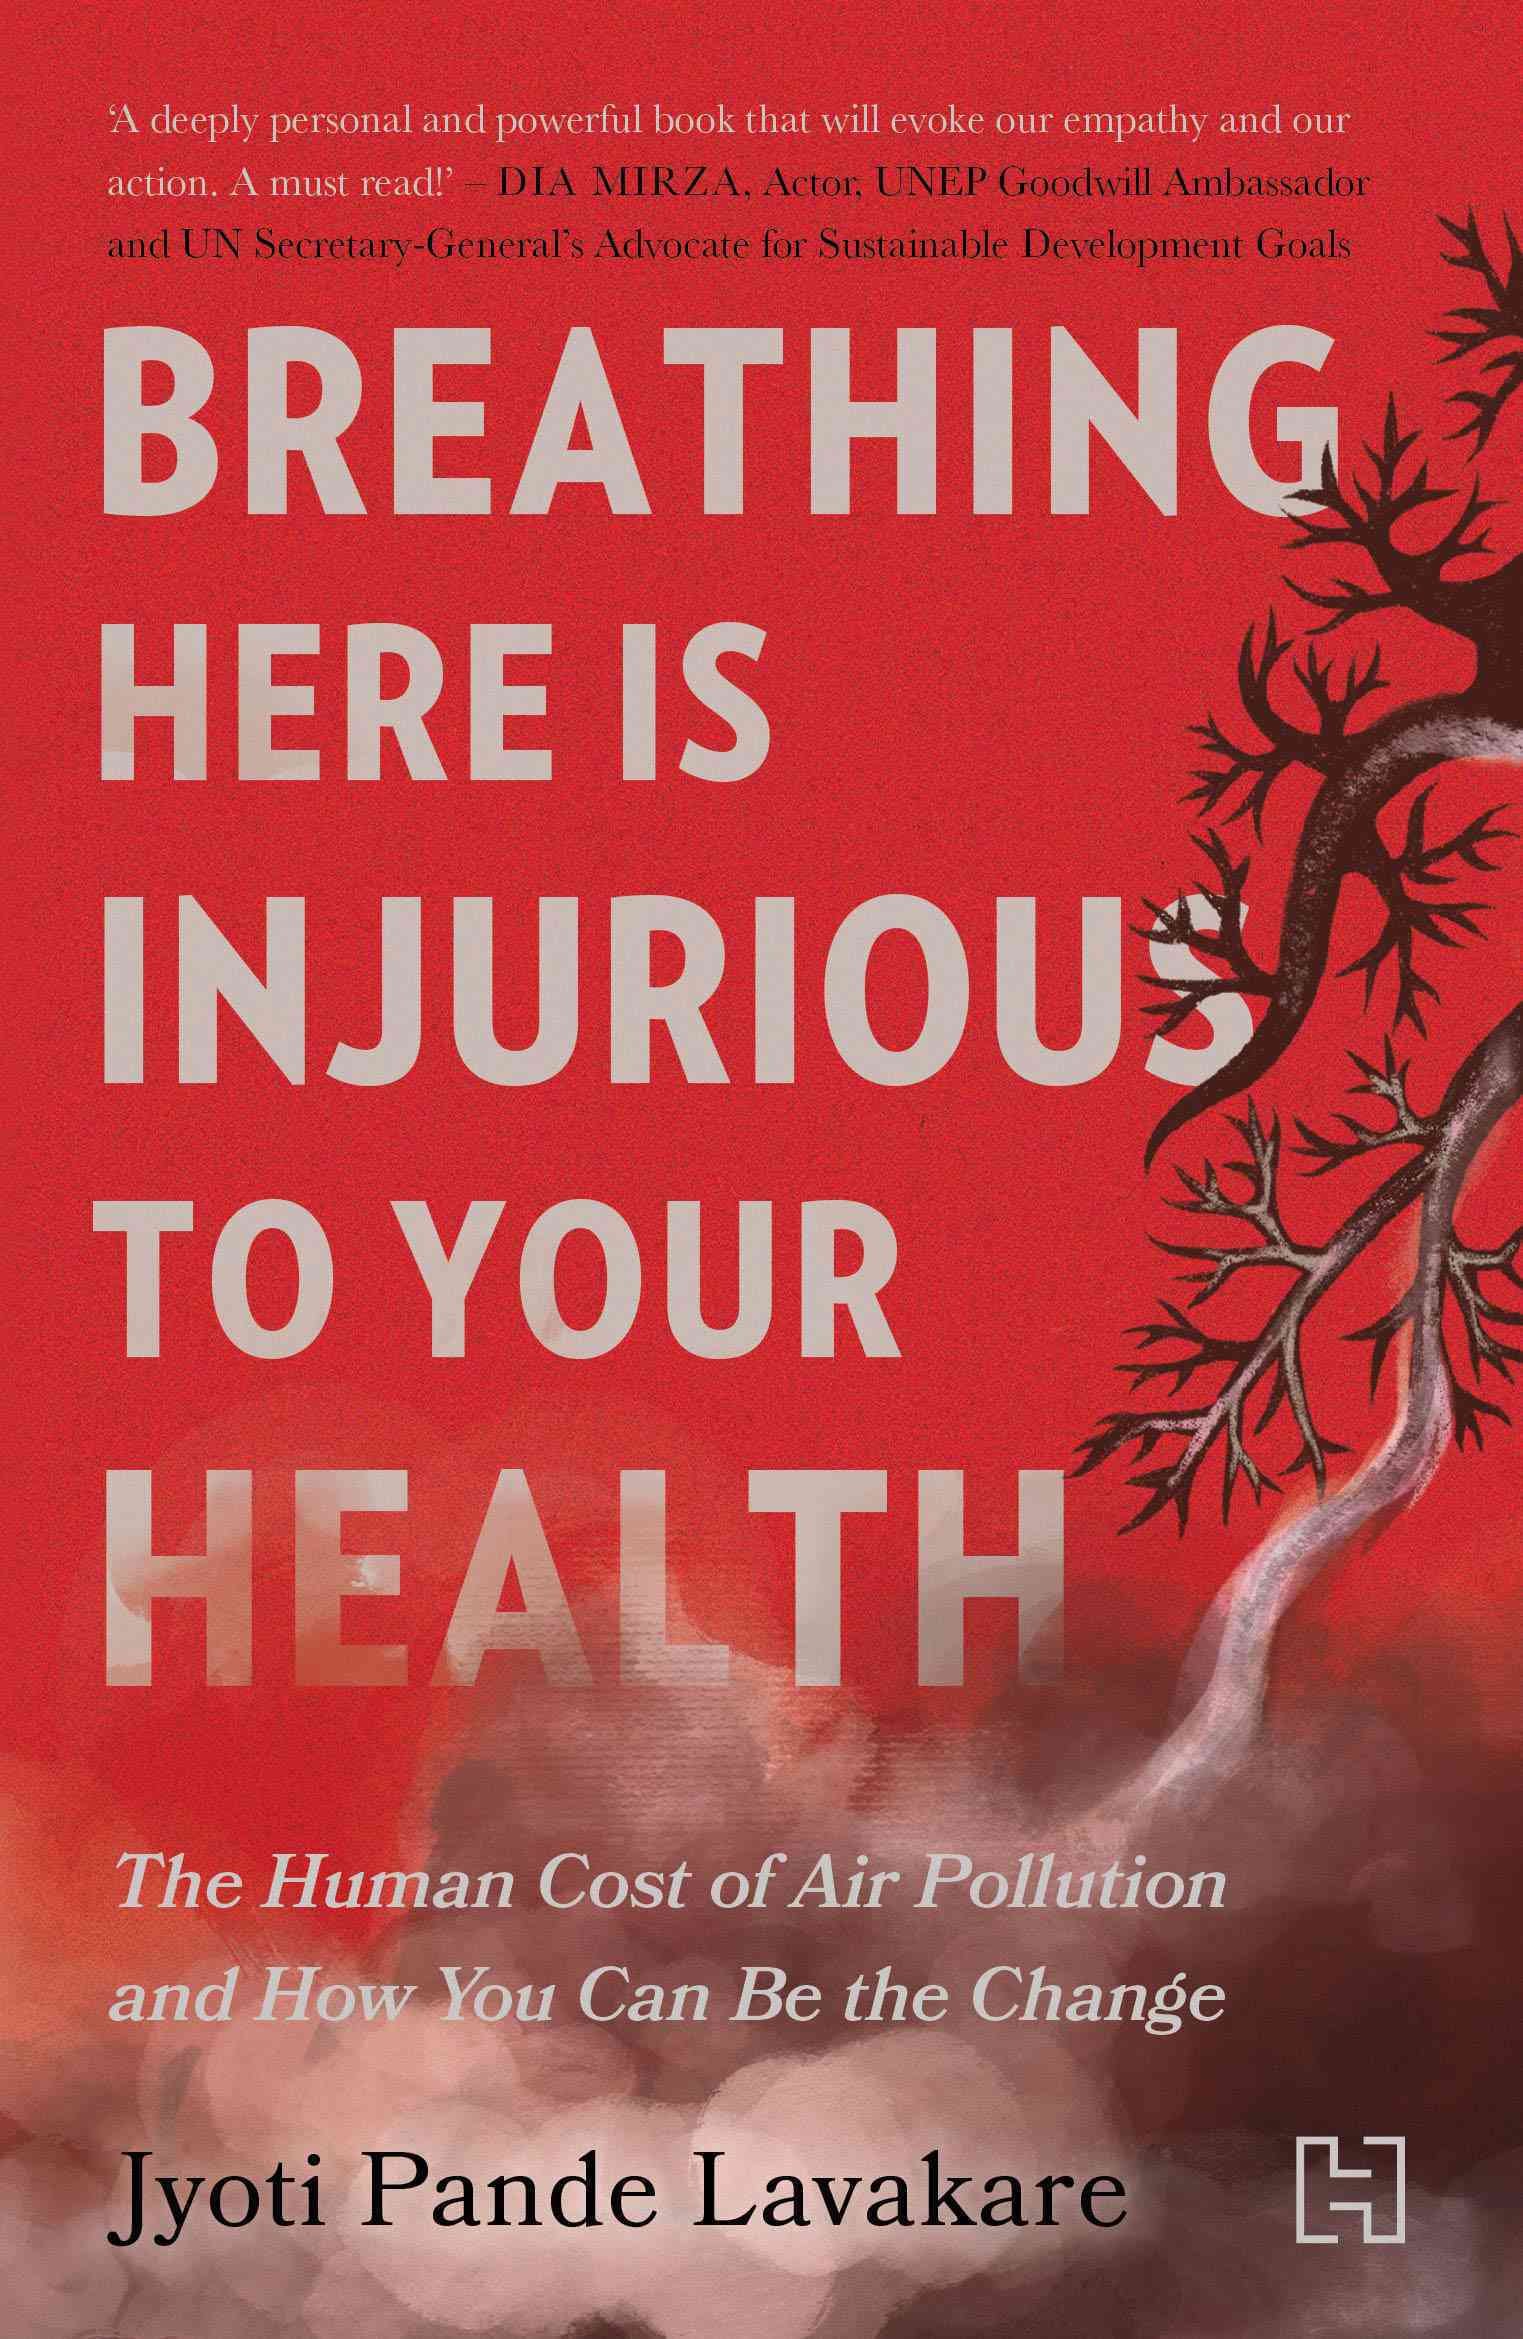 Breathing Here Is Injurious to Your Health